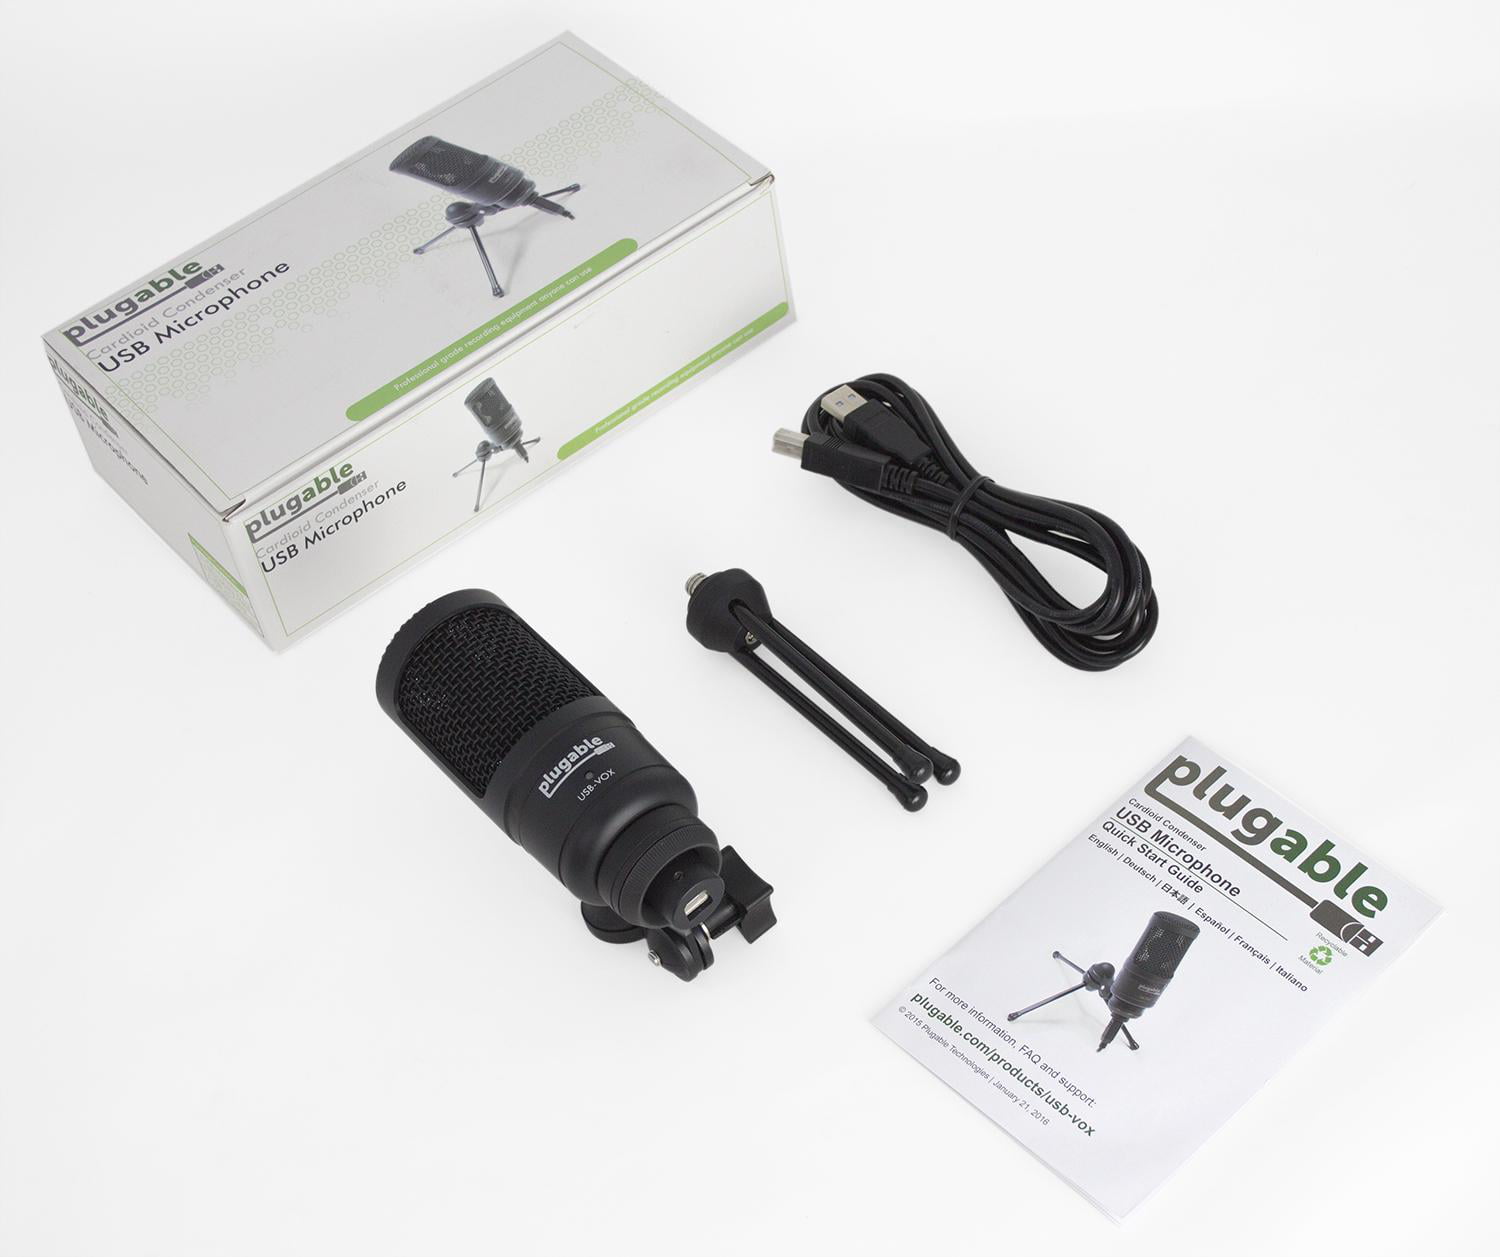 Plugable Performance Studio-Grade USB Microphone Cardioid Condenser Compatible With Windows, macOS & Linux Optimized for Streaming Twitch/Mixer/YouTube/Discord